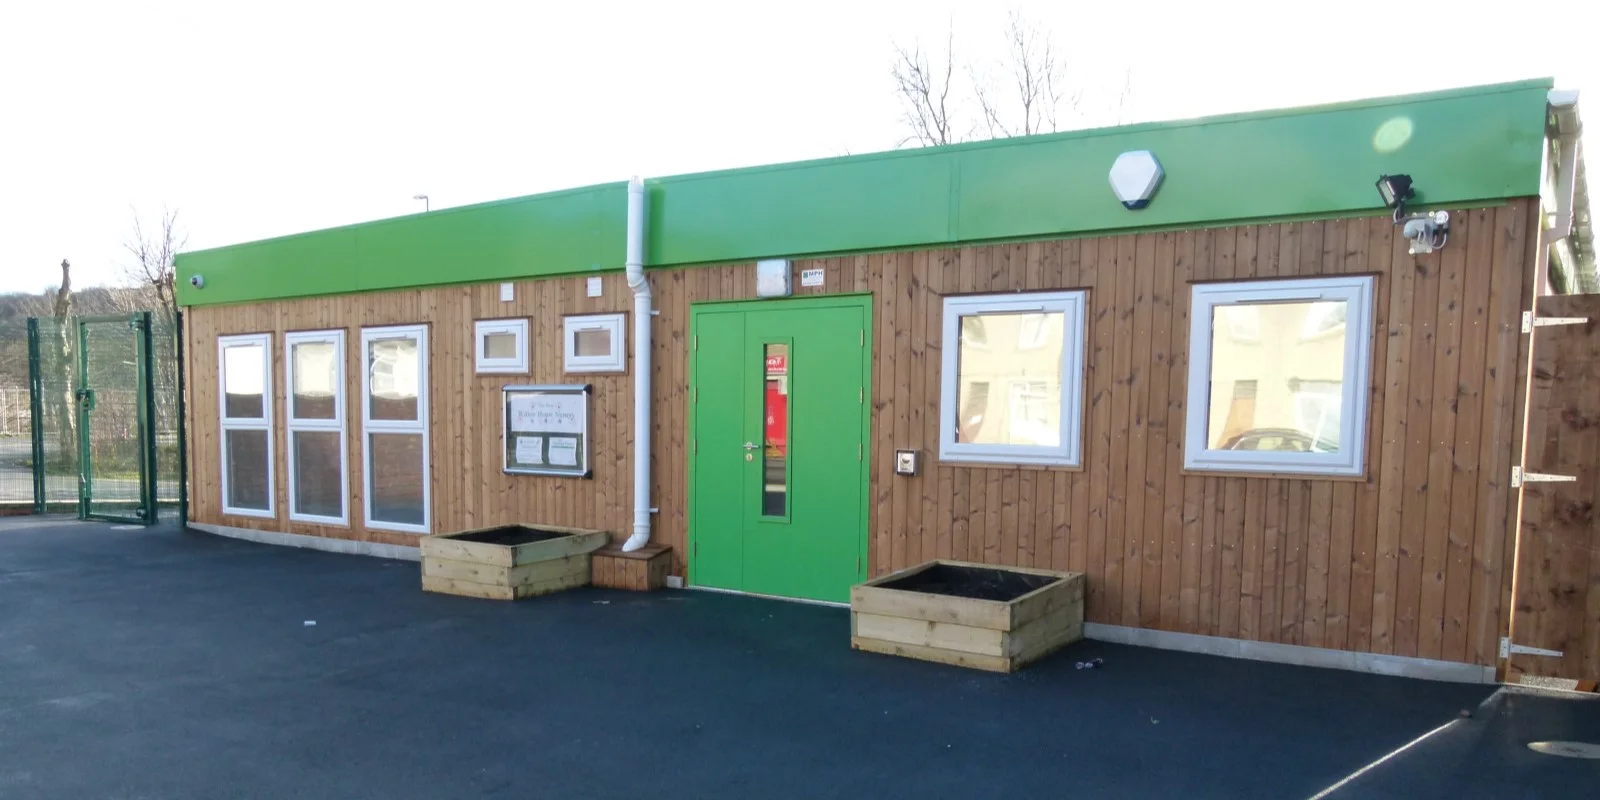 Modular Classroom - Portable Classroom Building In Yorkshire By MPH Modular Contractors